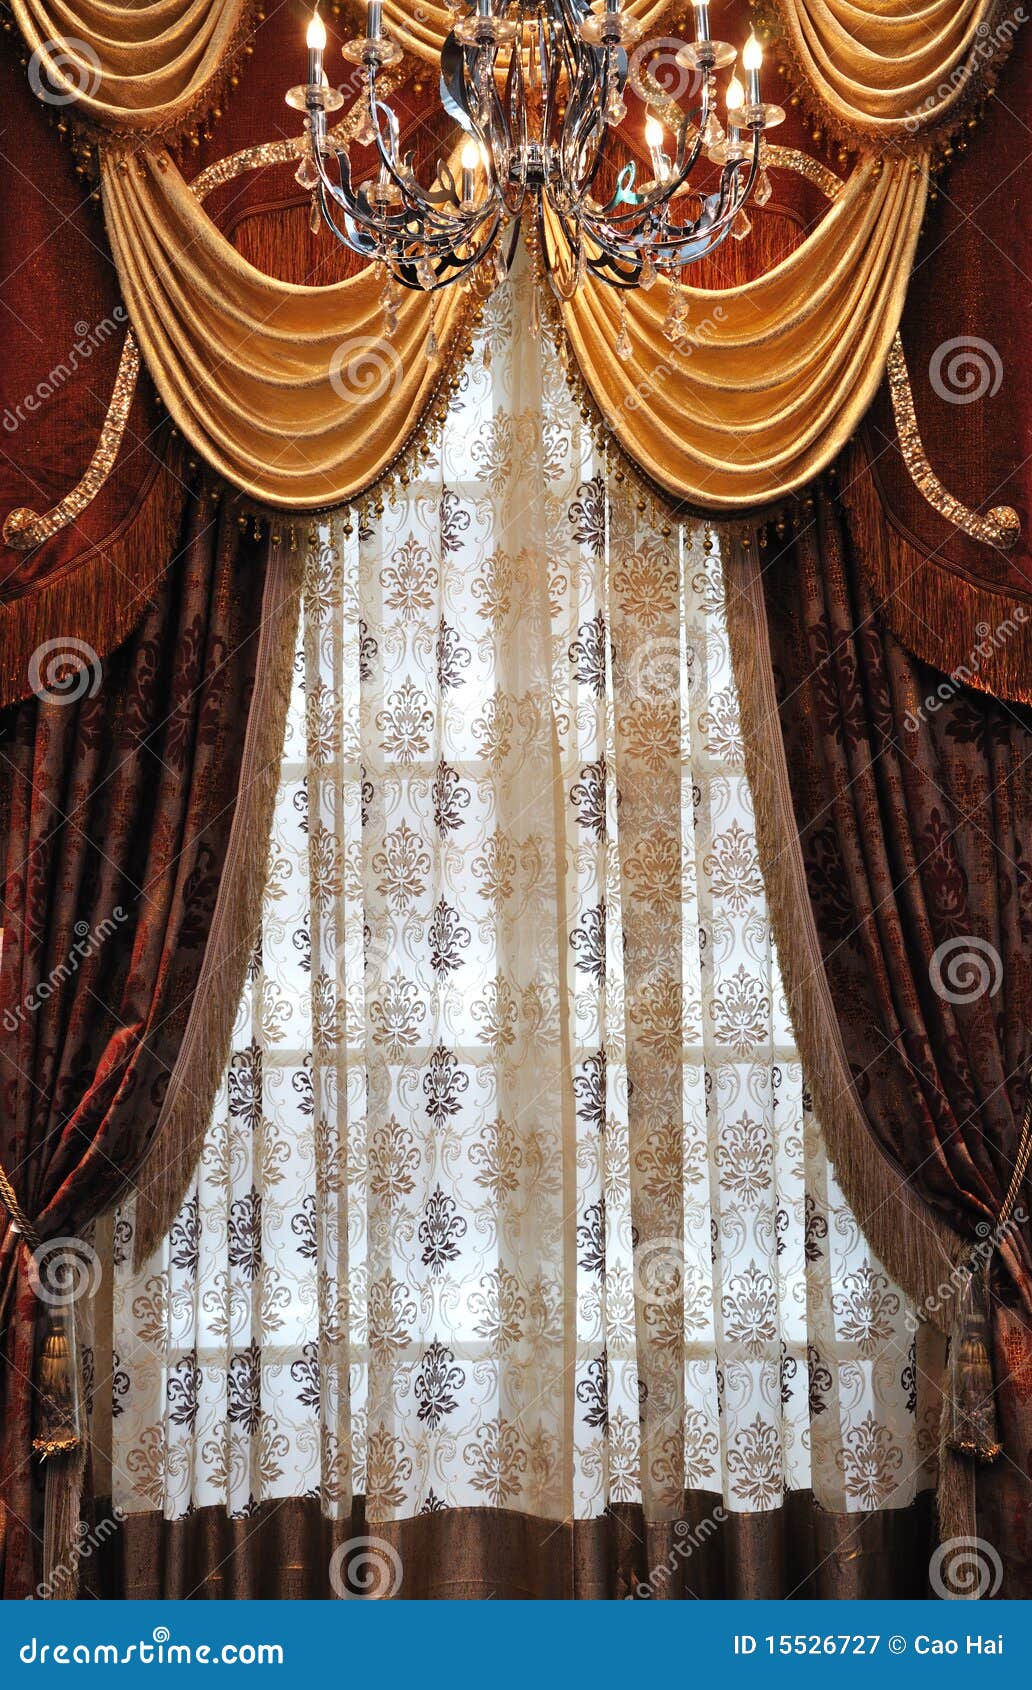 curtains and droplight